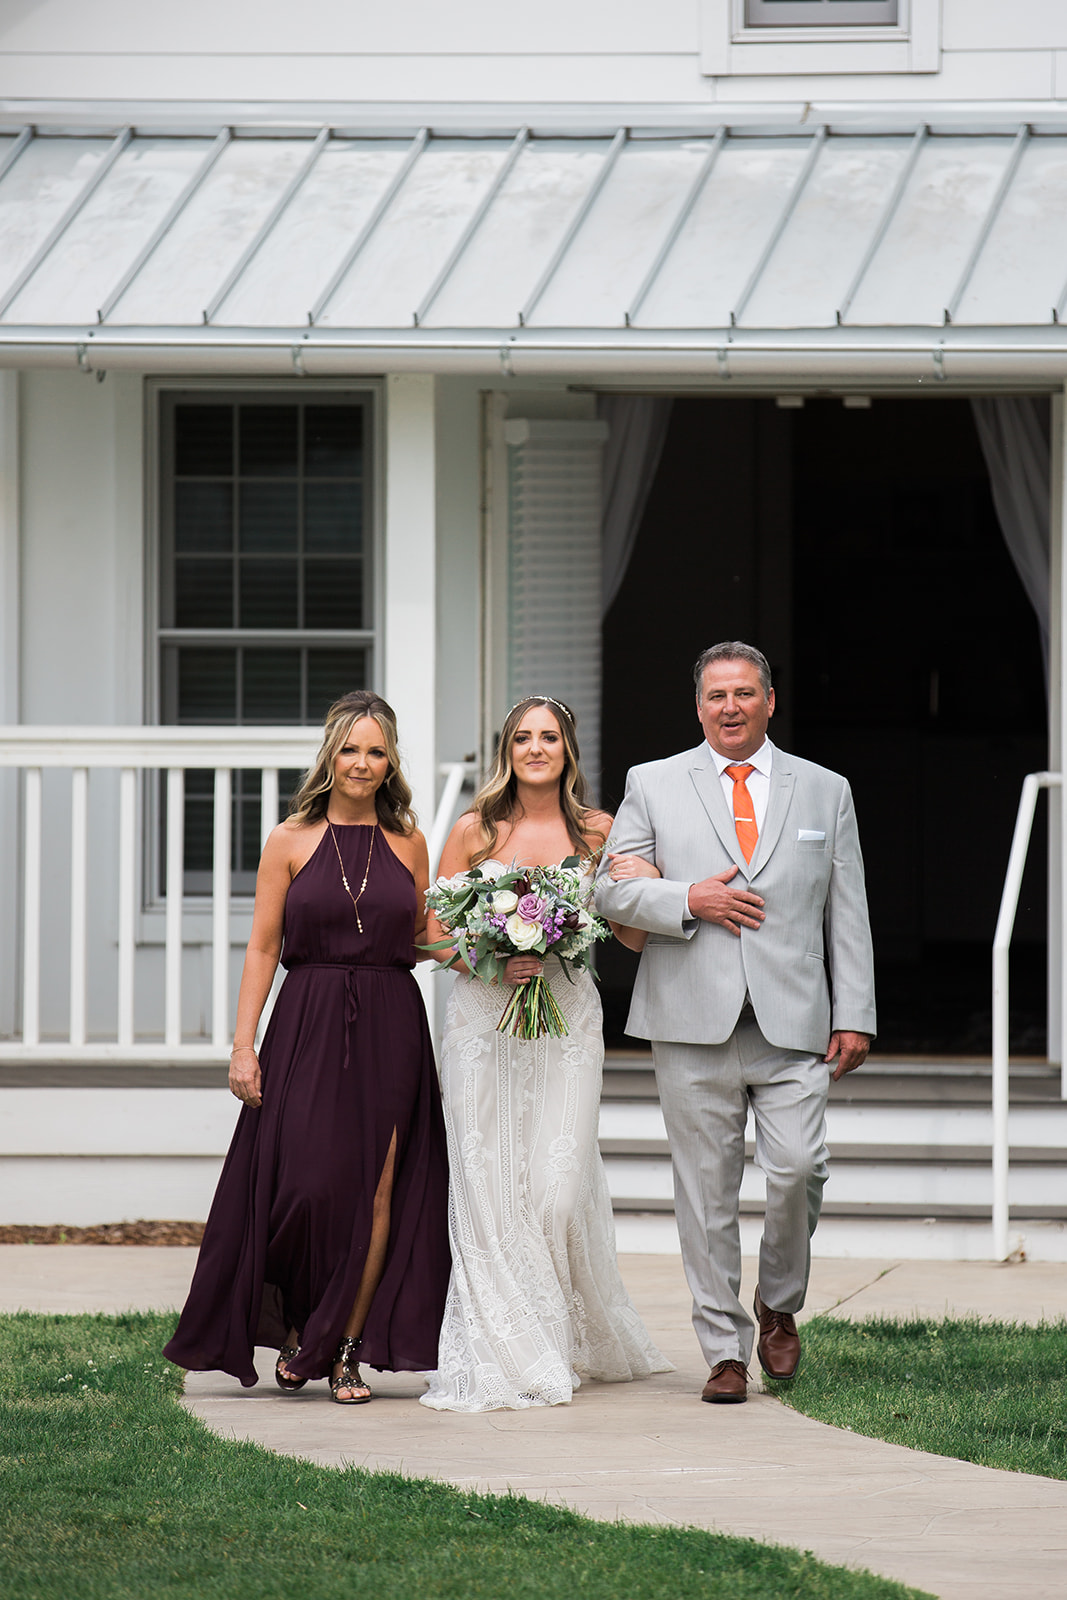 bride, father of the bride, and mother of the bride walking down the aisle